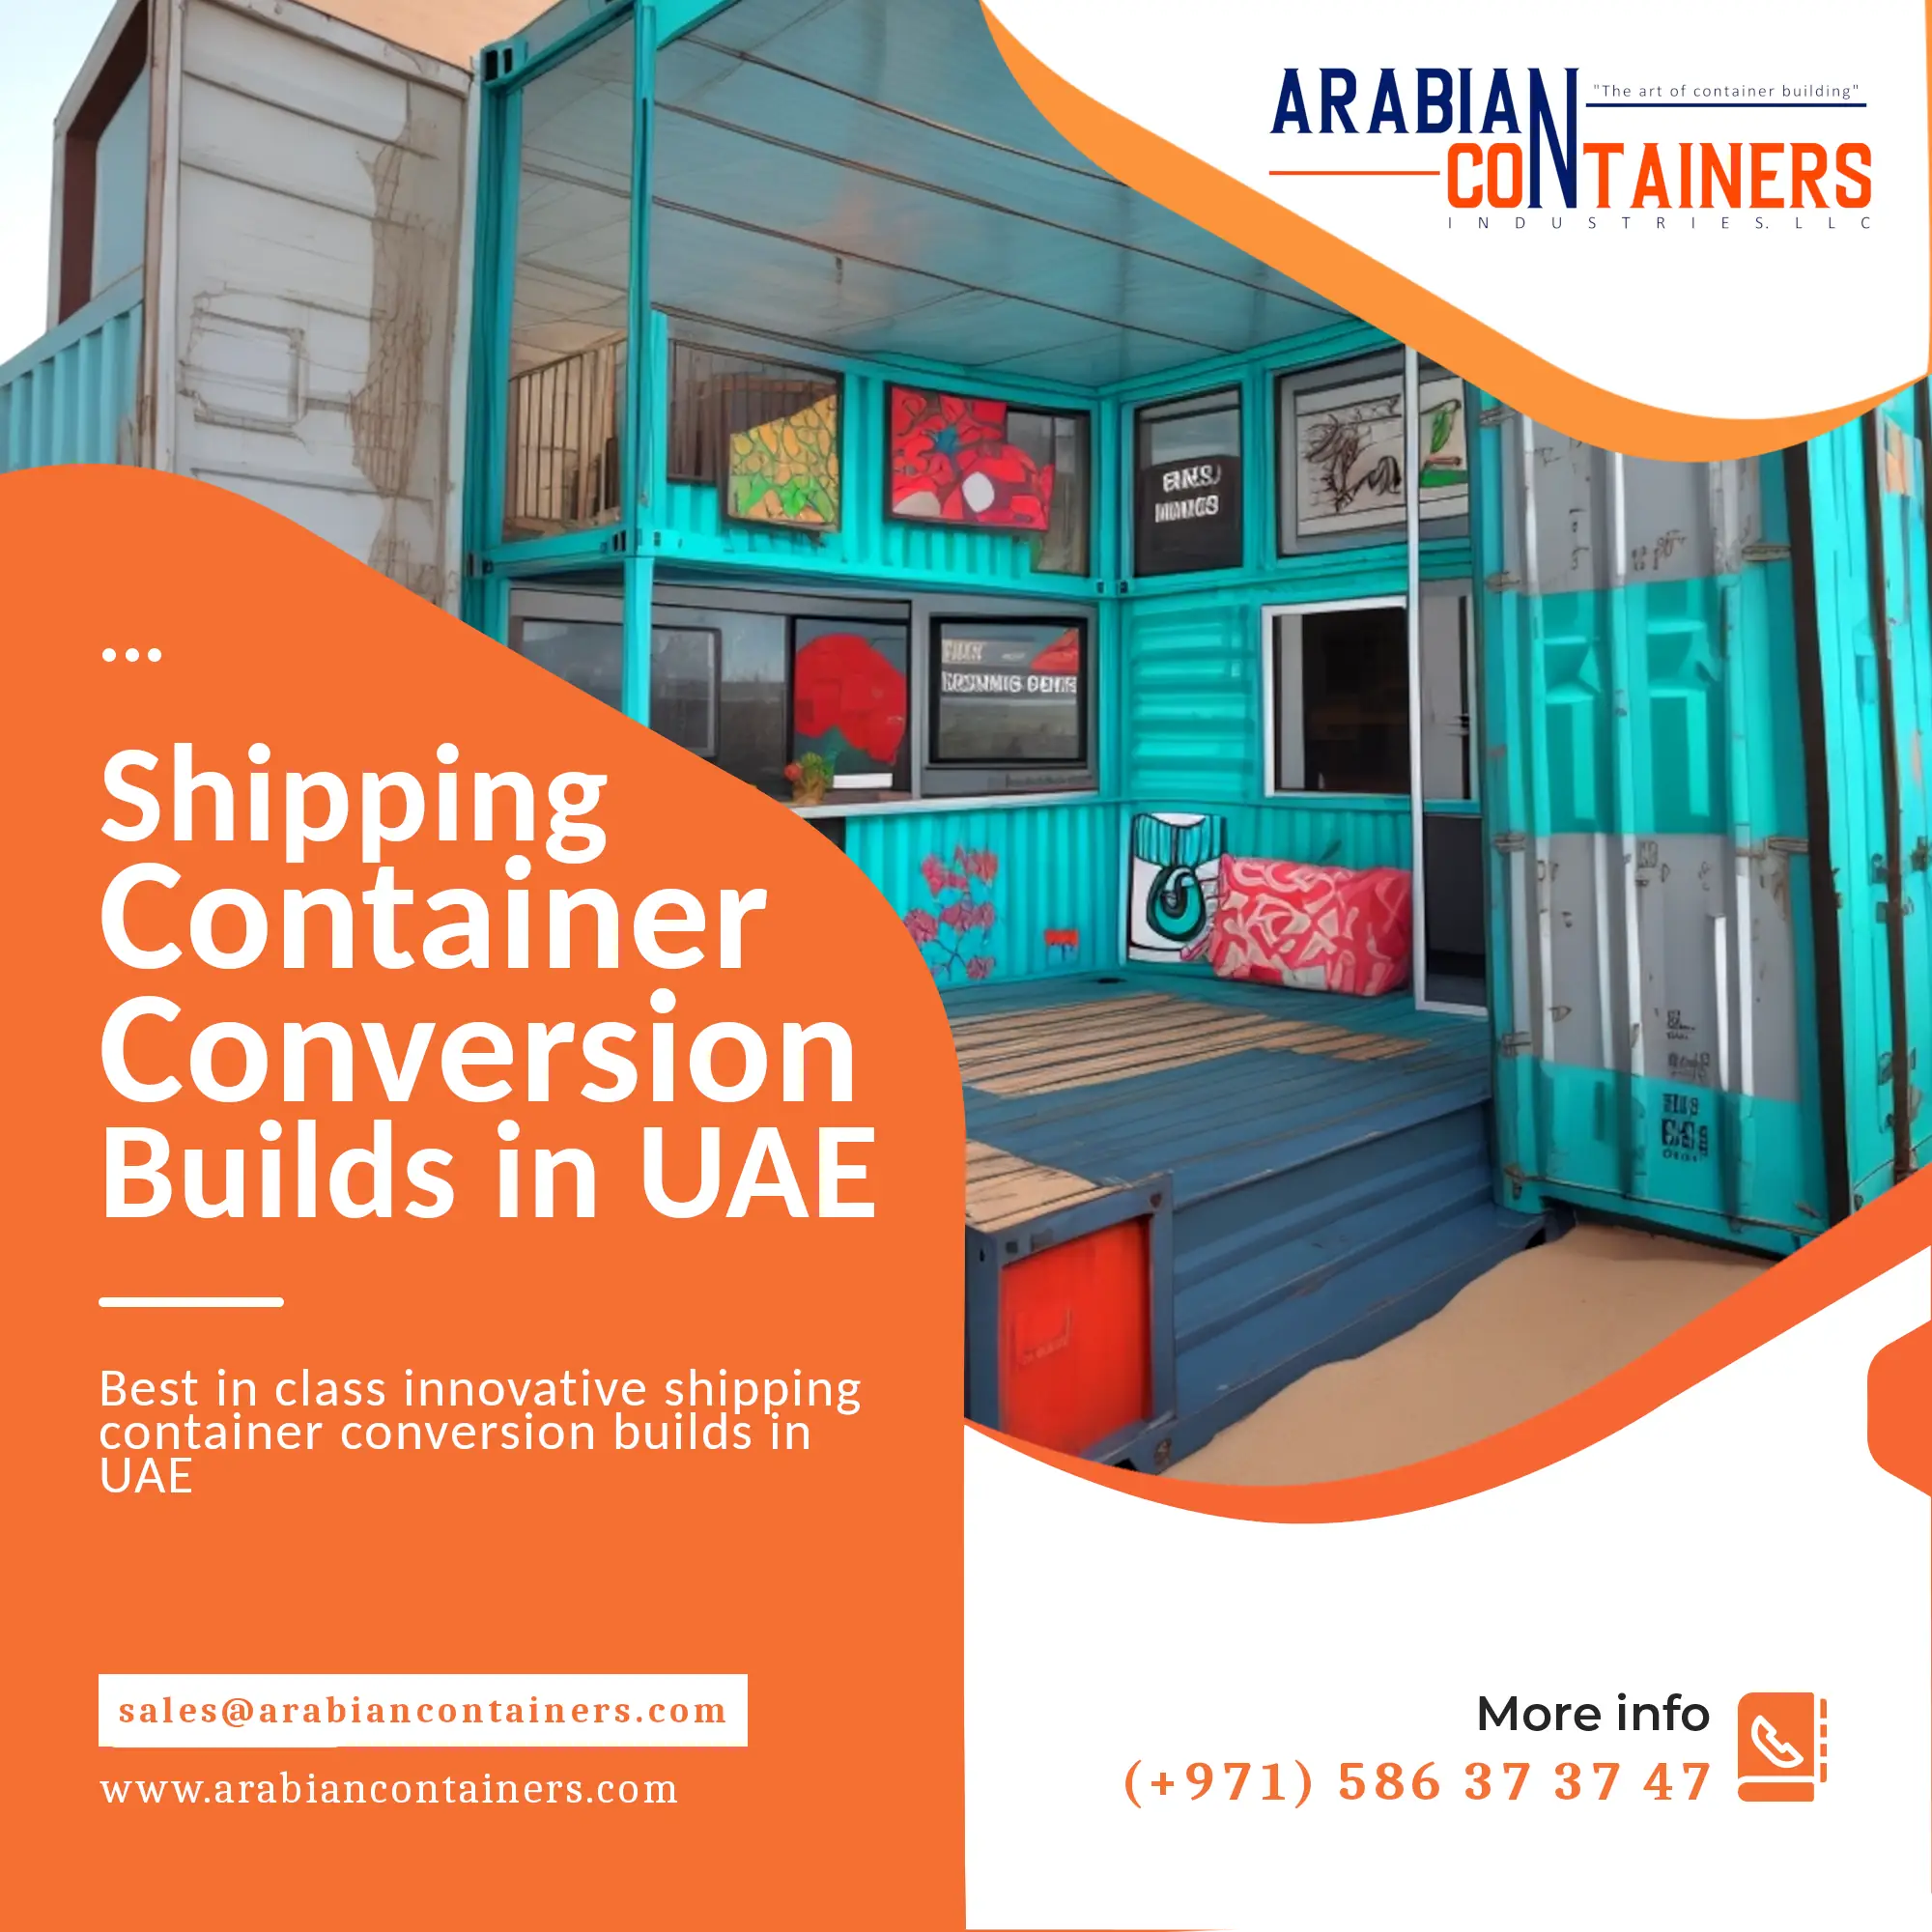 Shipping Container Conversion company in UAE.